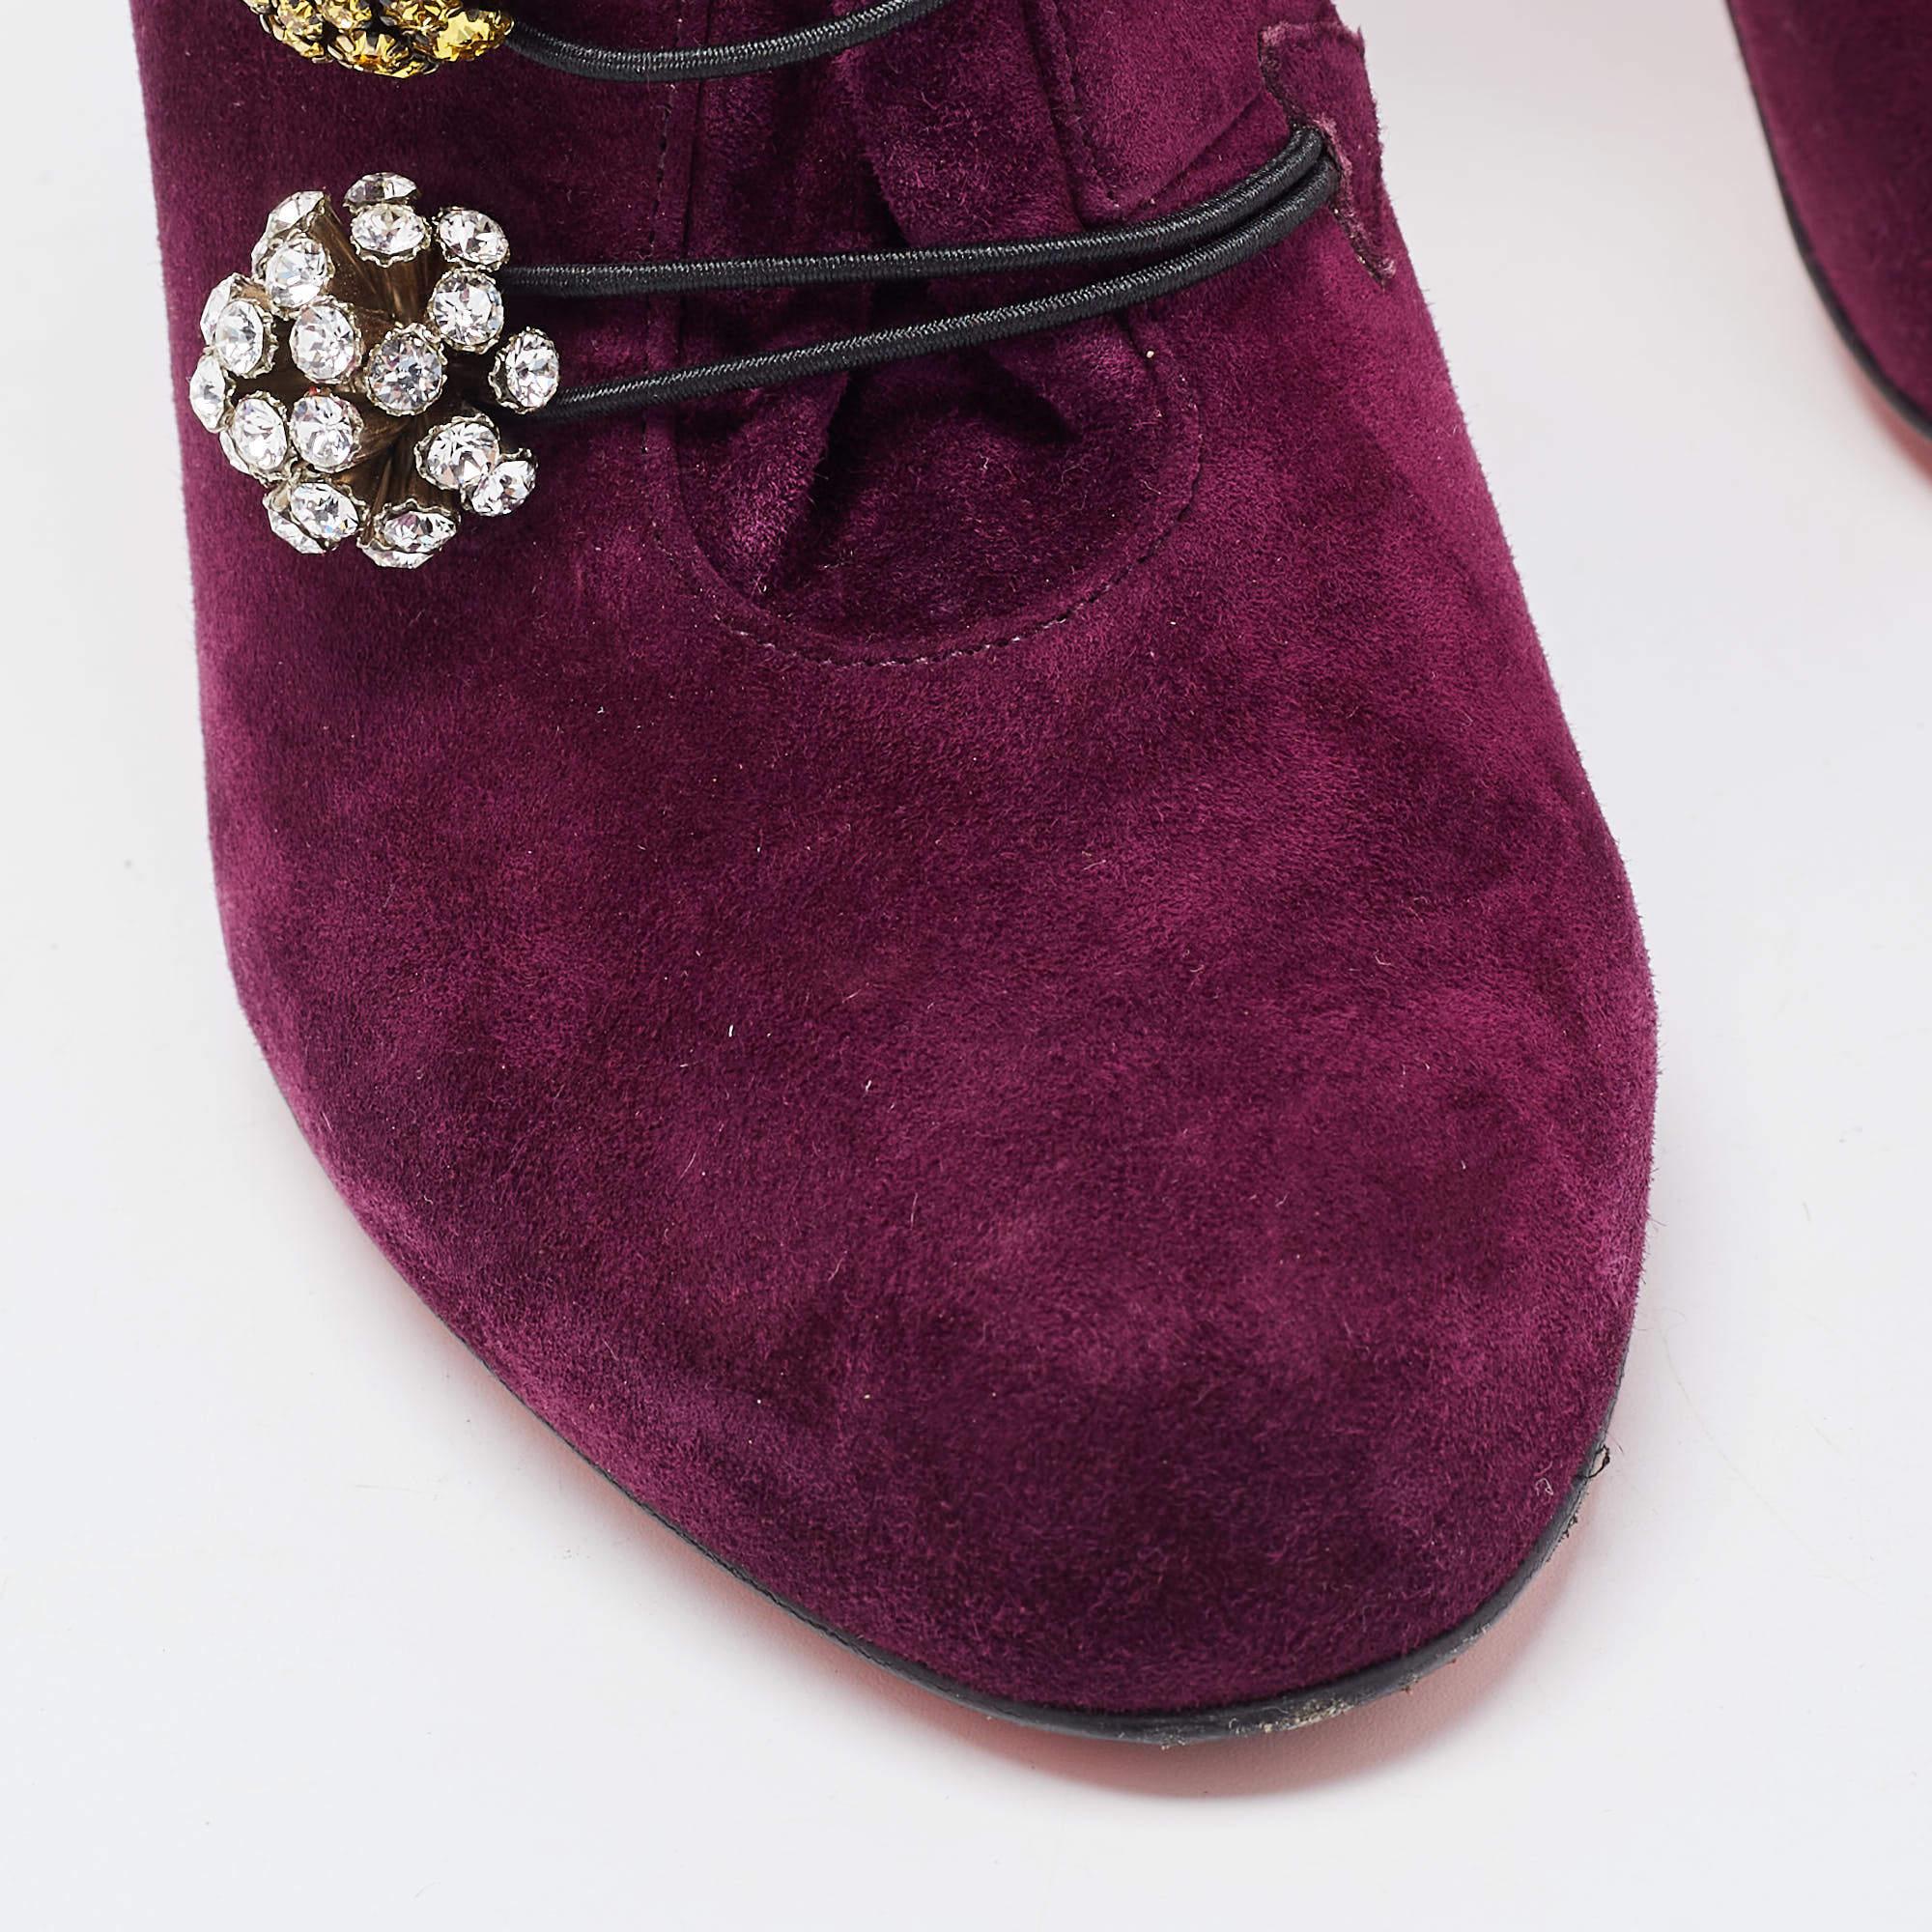 Christian Louboutin Purple Suede Booties Size 35.5 For Sale 3